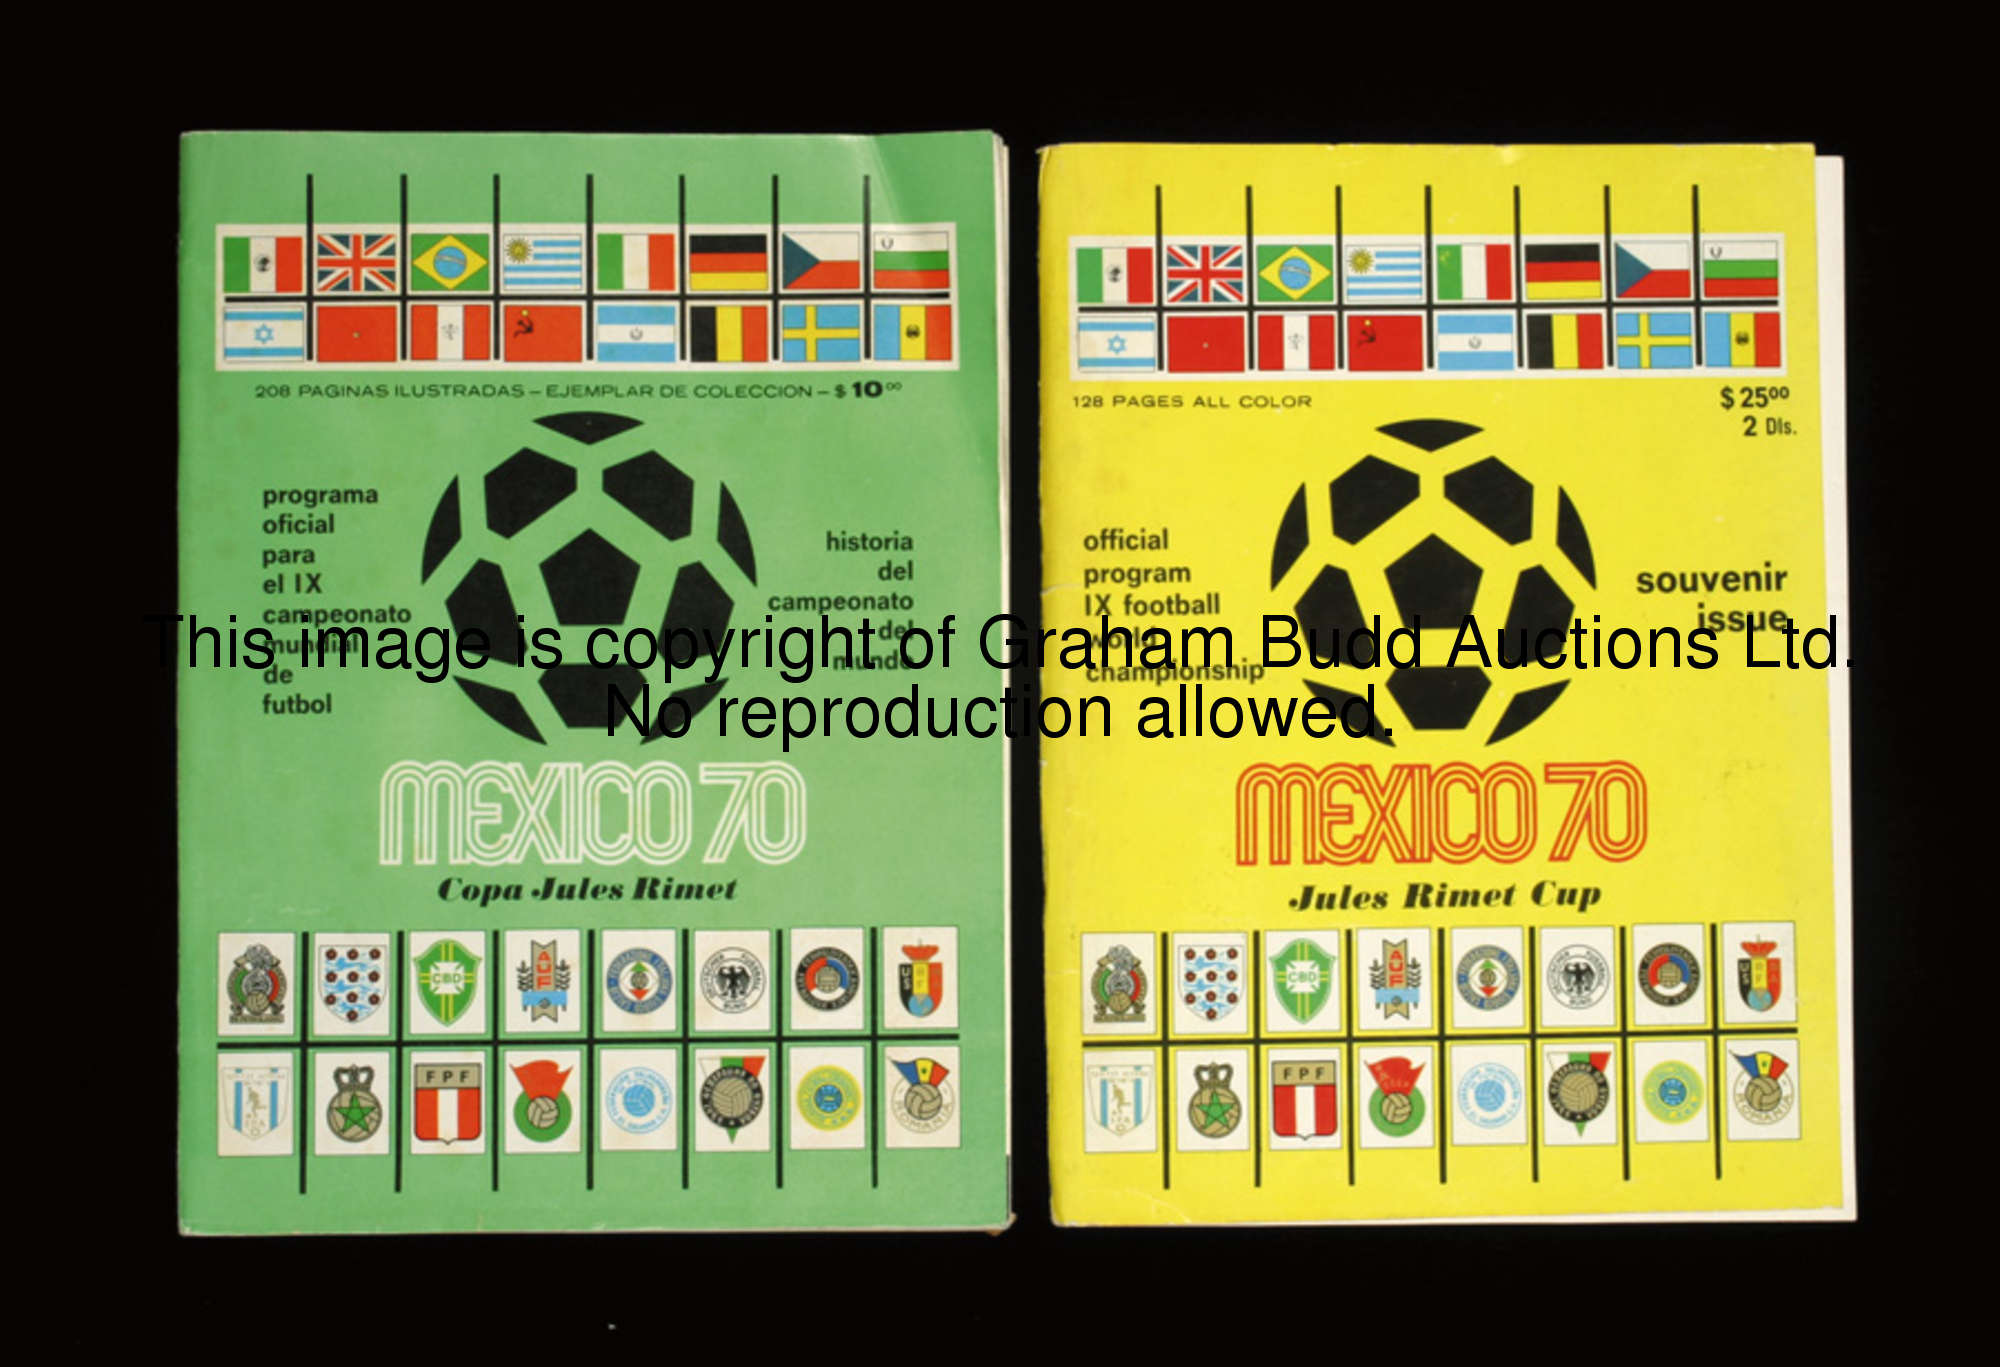 Two 1970 World Cup programmes, the green covered 208-pager and the yellow covered 128-pager